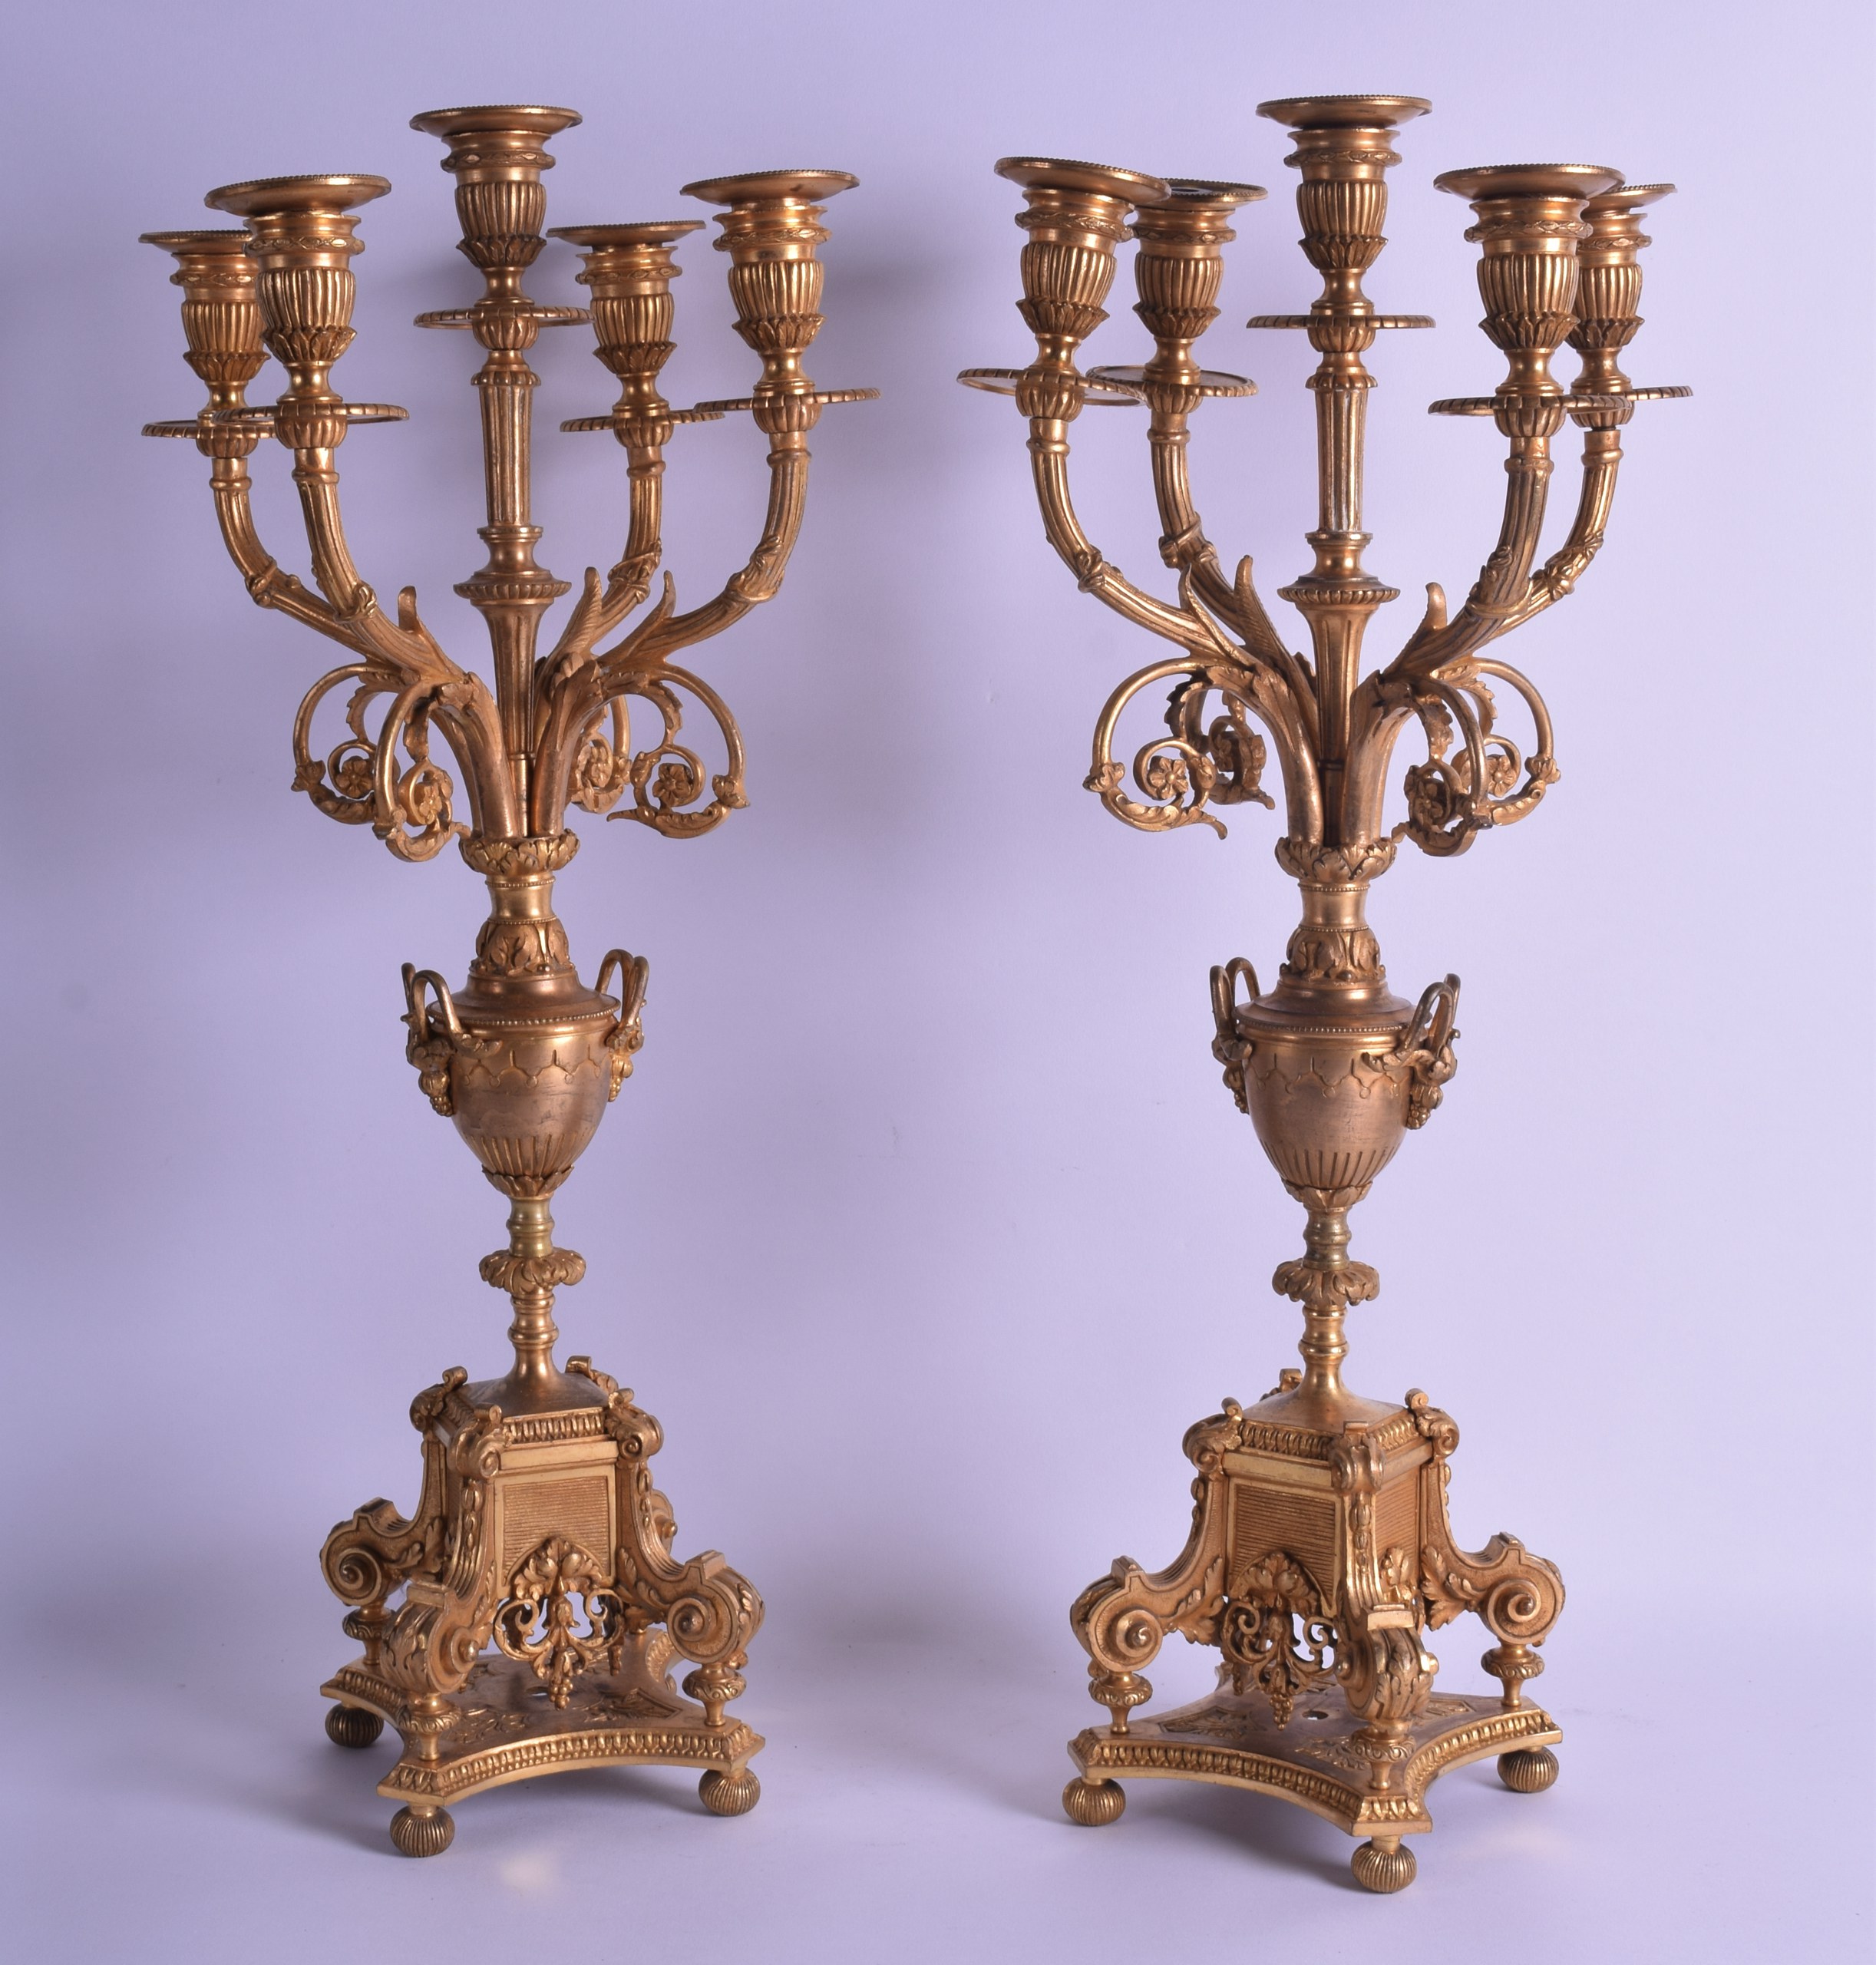 A PAIR OF LATE 19TH CENTURY FRENCH ORMOLU FIVE BRANCH CANDLEABRA modelled with scrolling acanthus